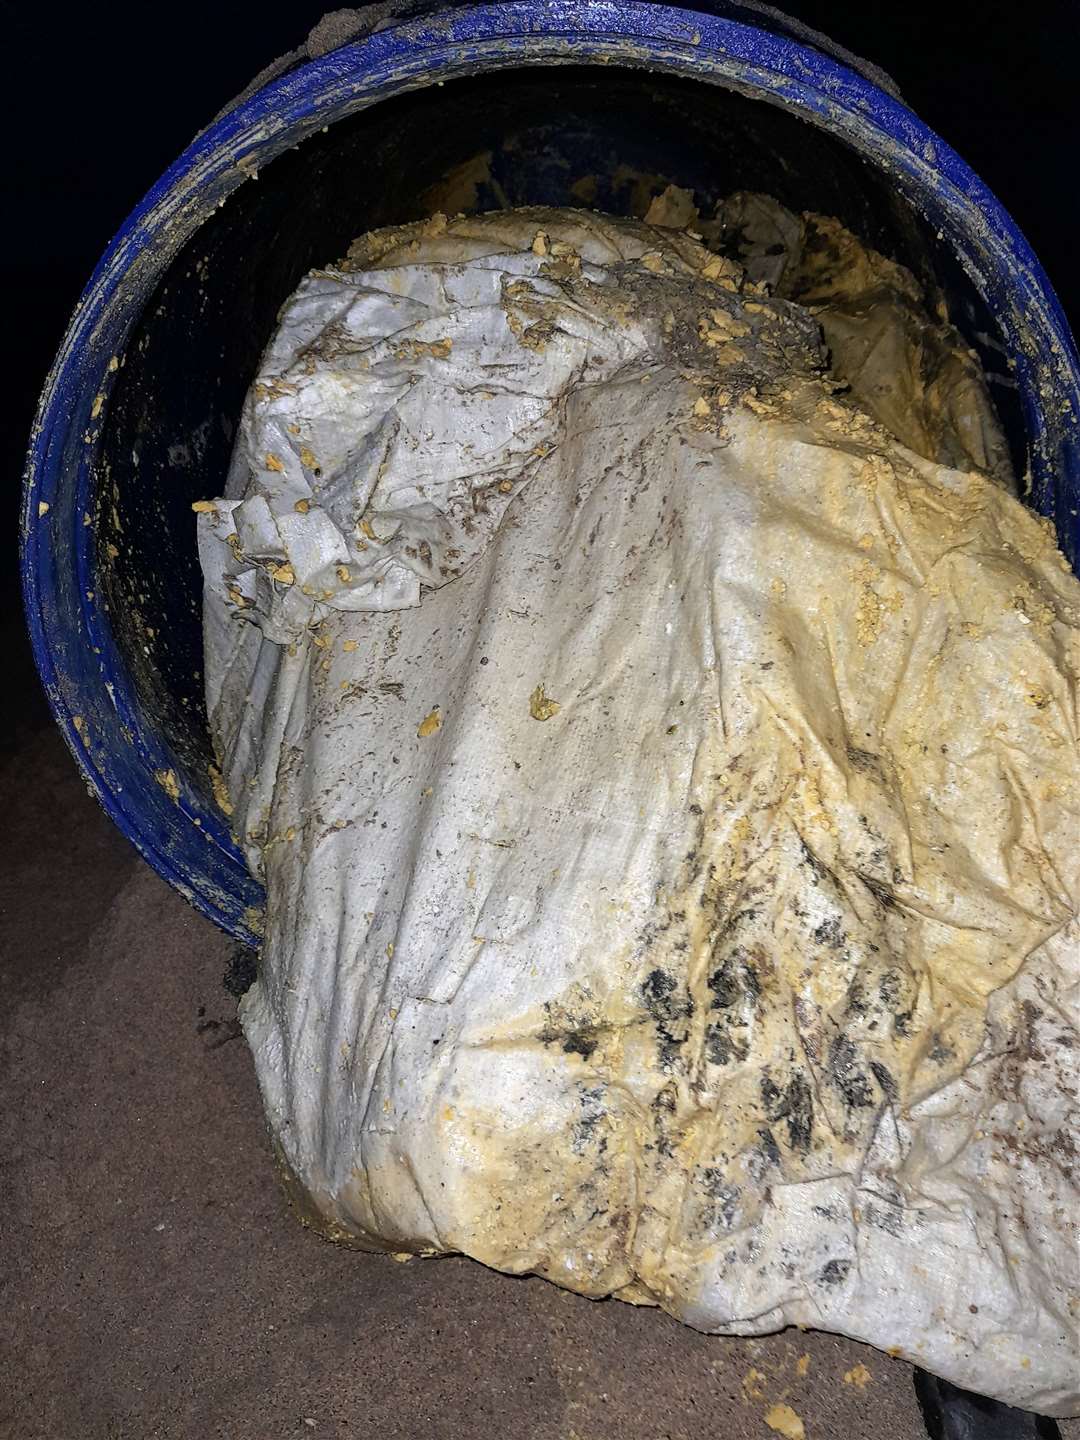 The barrel was filled with bags of powder.